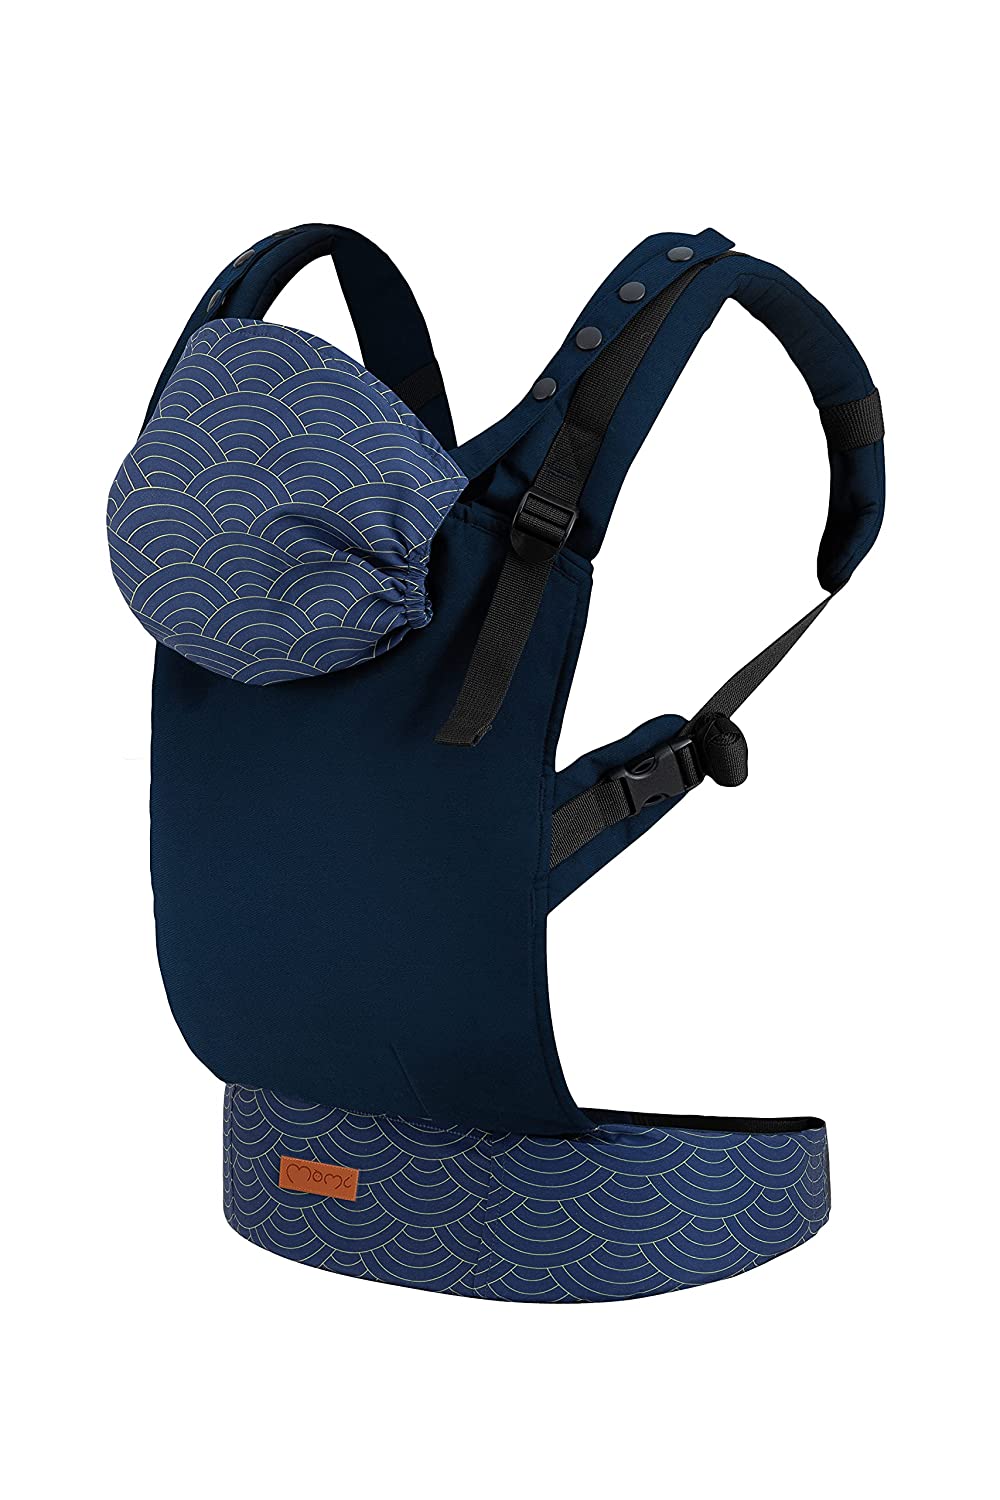 MOMI Collete Baby Carrier from 3rd Months, for Babies and Toddlers up to 20 kg Body Weight, with Hood and Head Support for Baby, Optimal Adjustment with 6 Adjustment Points | Flow